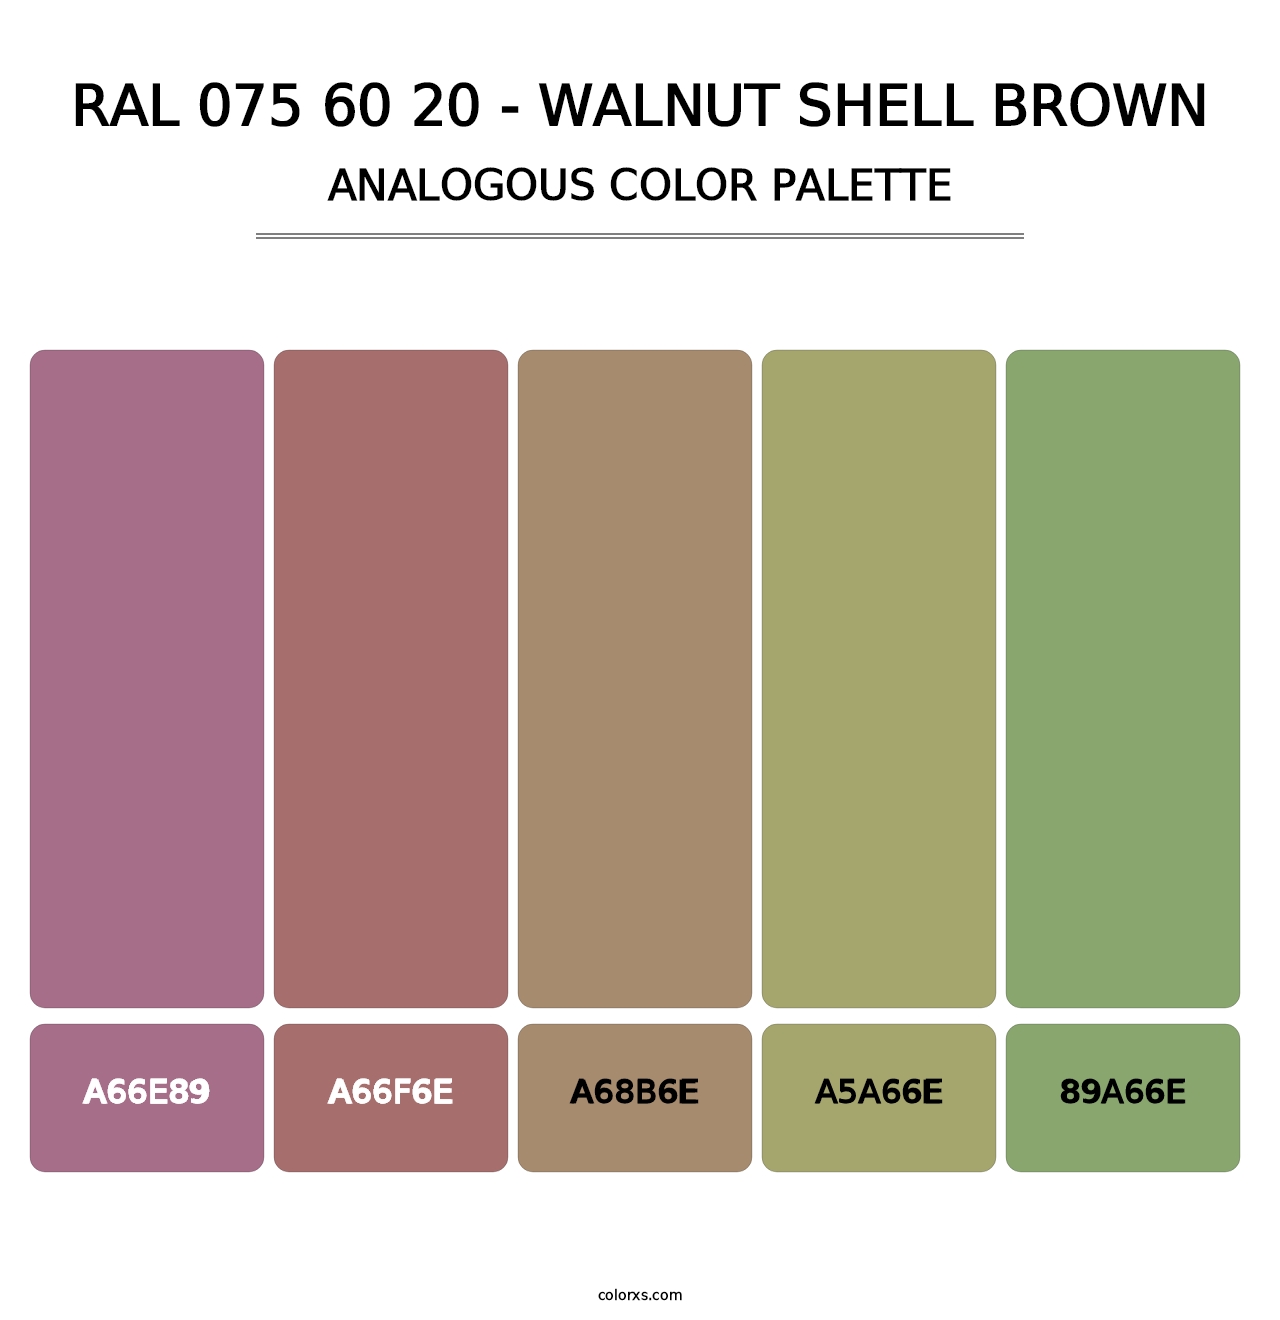 RAL 075 60 20 - Walnut Shell Brown - Analogous Color Palette